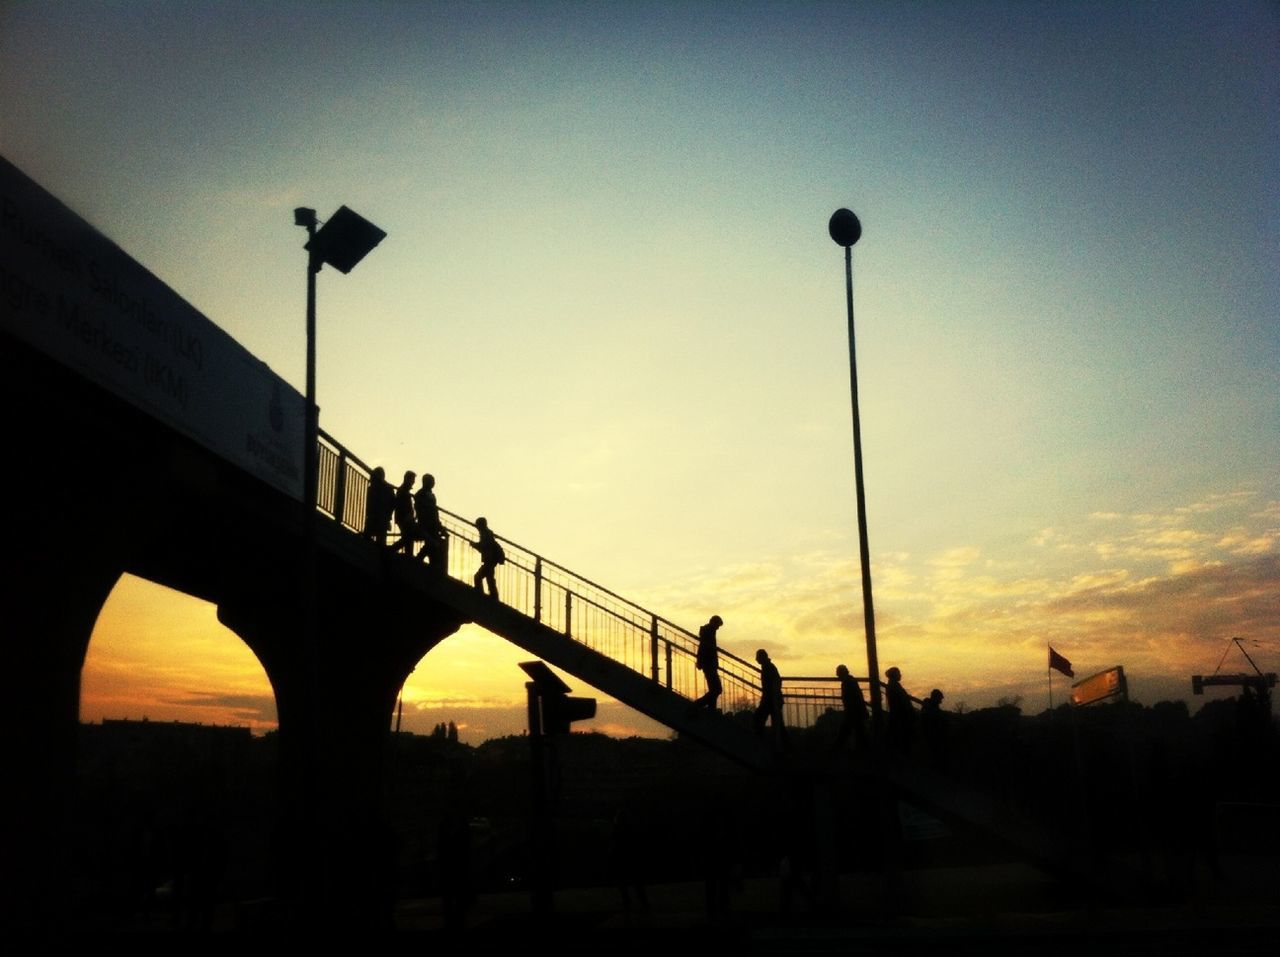 silhouette, sunset, built structure, architecture, street light, connection, bridge - man made structure, sky, low angle view, transportation, dusk, bridge, engineering, orange color, railing, clear sky, lighting equipment, copy space, outdoors, incidental people